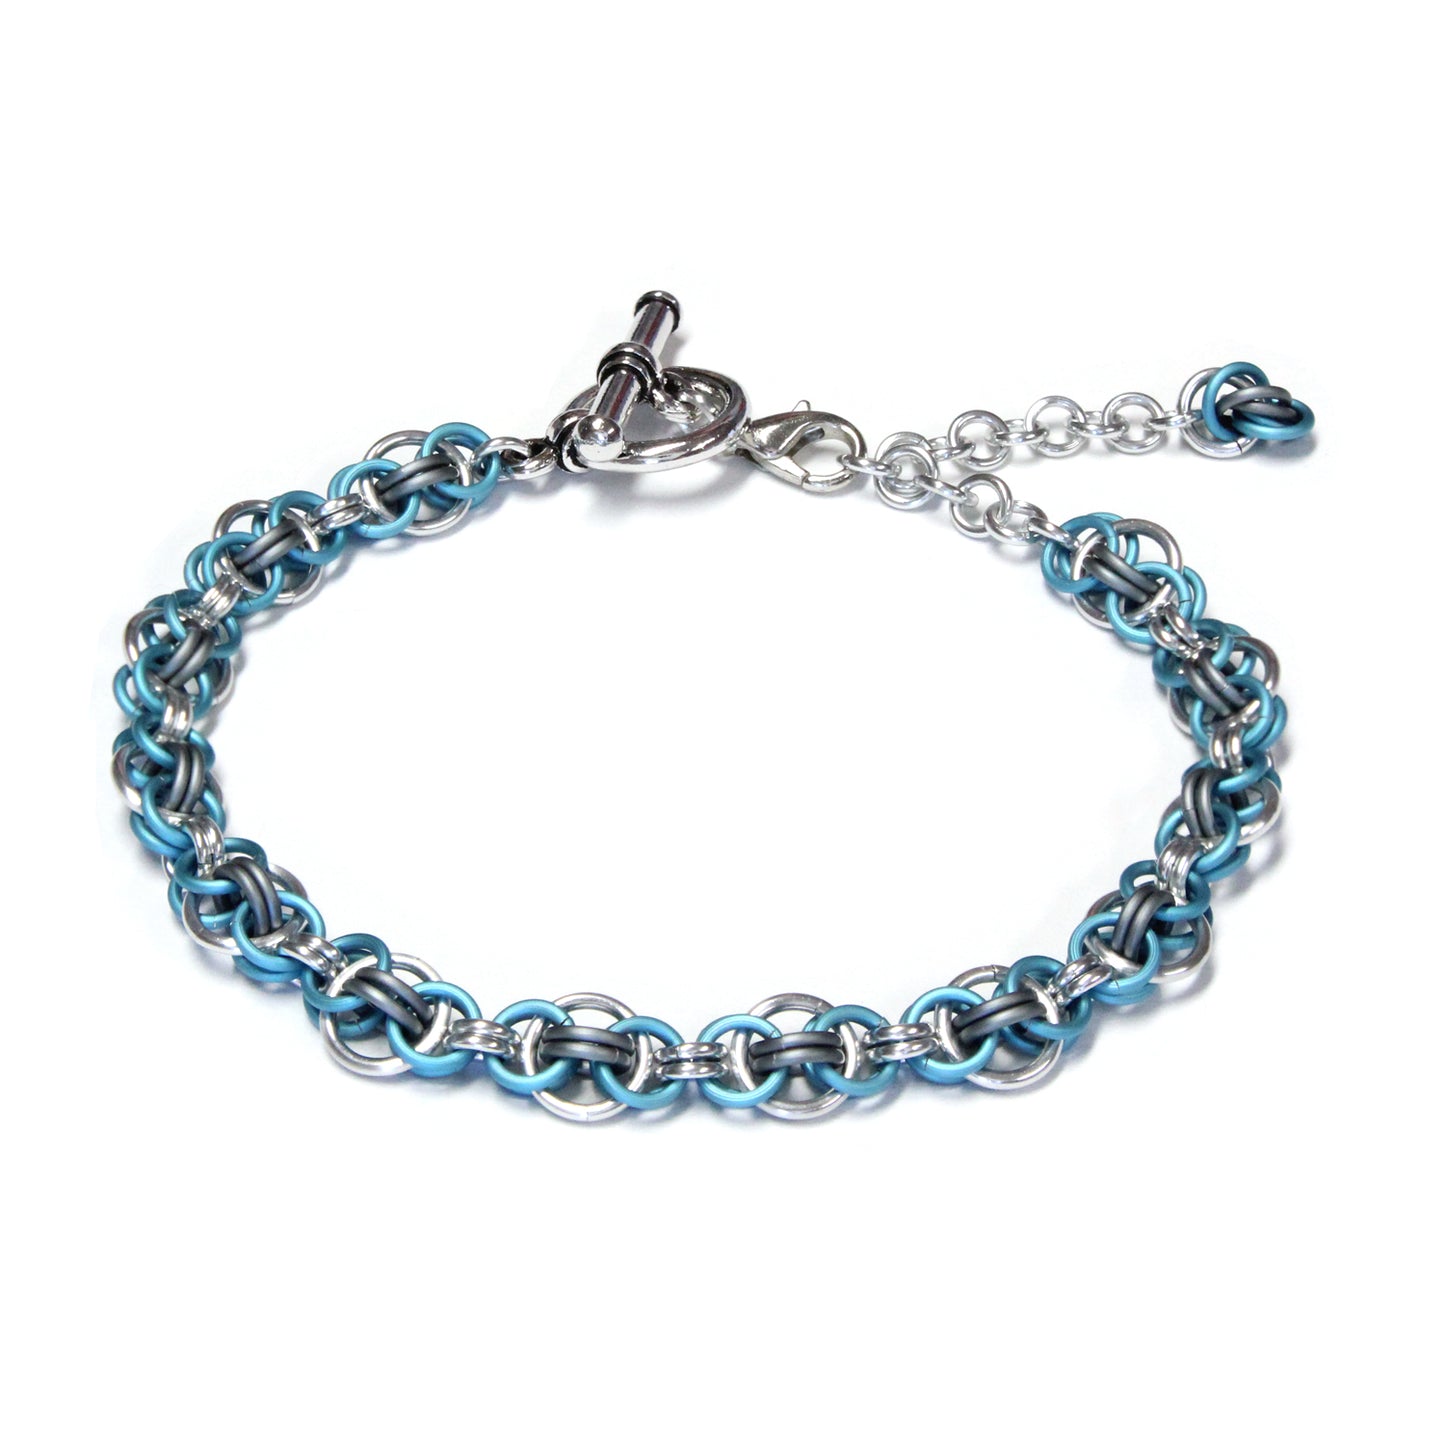 Modified Helm Chain Bracelet / with adjustable clasp for 6-1/2 to 7-1/2 inch wrist / includes matching earrings